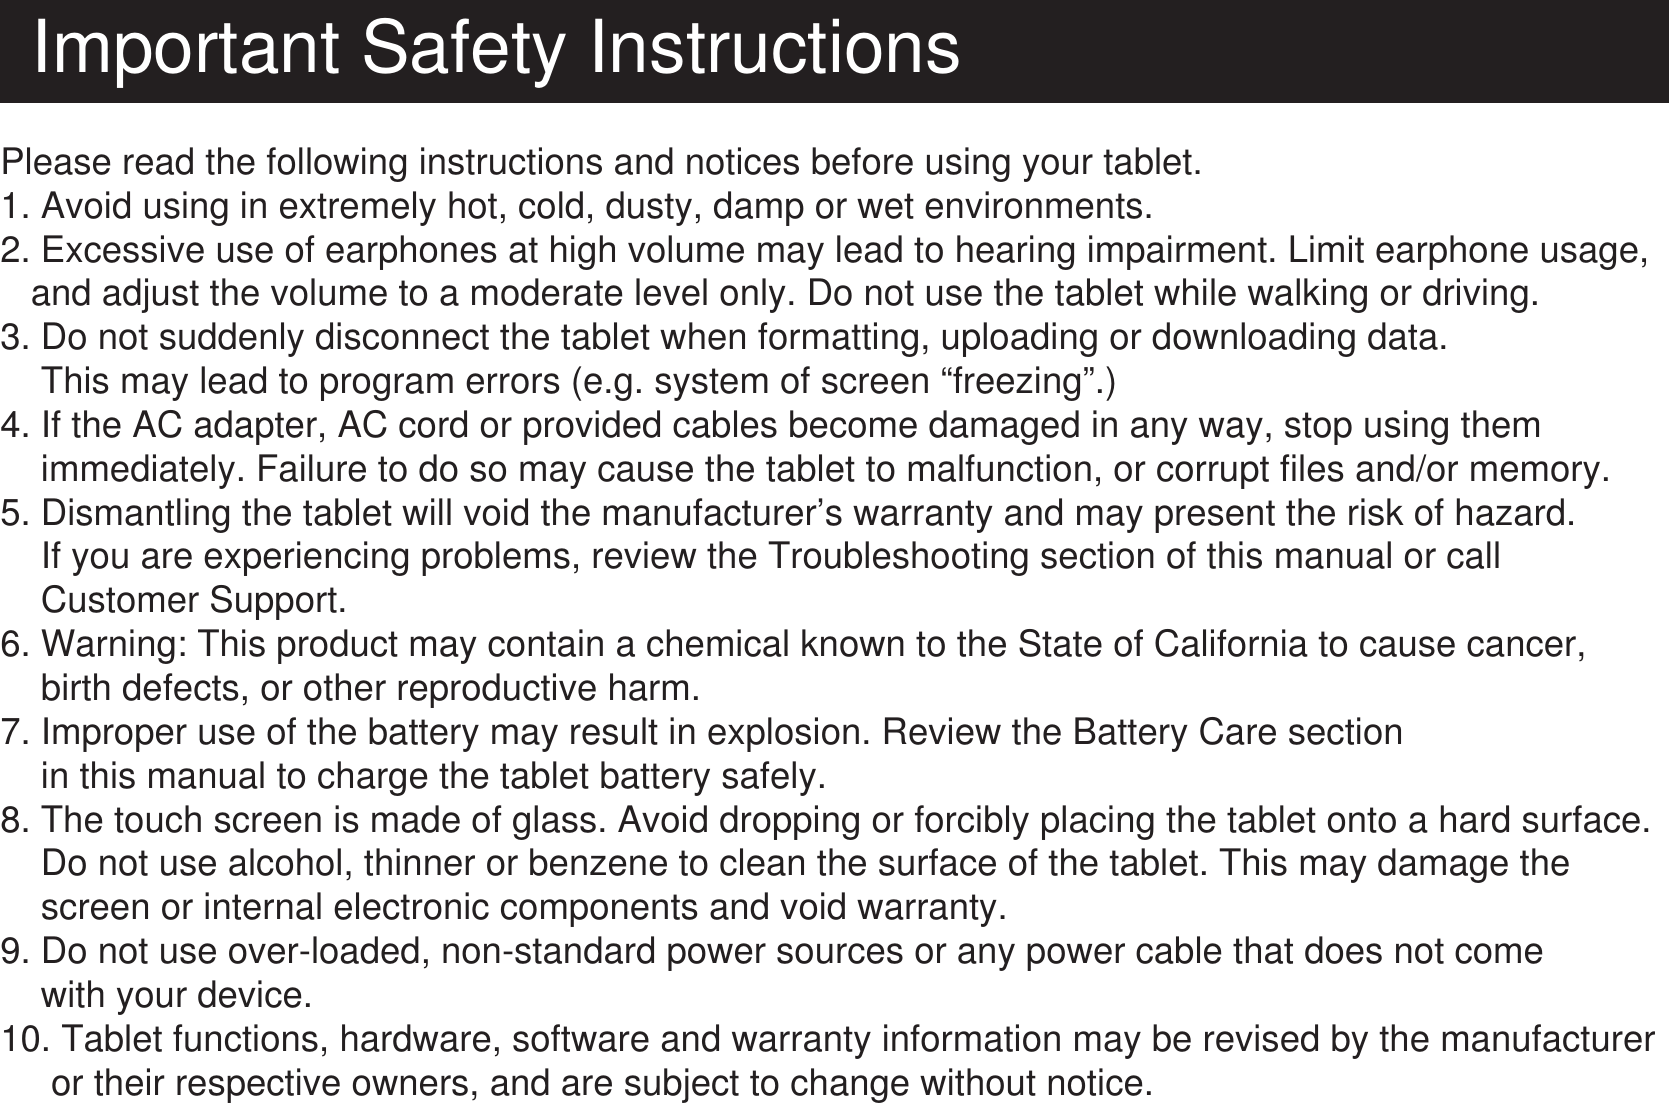 Important Safety InstructionsPlease read the following instructions and notices before using your tablet.1. Avoid using in extremely hot, cold, dusty, damp or wet environments.2. Excessive use of earphones at high volume may lead to hearing impairment. Limit earphone usage,    and adjust the volume to a moderate level only. Do not use the tablet while walking or driving.3. Do not suddenly disconnect the tablet when formatting, uploading or downloading data.    This may lead to program errors (e.g. system of screen “freezing”.)     4. If the AC adapter, AC cord or provided cables become damaged in any way, stop using them     immediately. Failure to do so may cause the tablet  to malfunction, or corrupt files and/or memory.5. Dismantling the tablet will void the manufacturer’s warranty and may present the risk of hazard.    If you are experiencing problems, review the Troubleshooting section of this manual or call     Customer Support.6. Warning: This product may contain a chemical known to the State of California to cause cancer,    birth defects, or other reproductive harm.7. Improper use of the battery may result in explosion. Review the Battery Care section     in this manual to charge the tablet battery safely.8. The touch screen is made of glass. Avoid dropping or forcibly placing the tablet onto a hard surface.    Do not use alcohol, thinner or benzene to clean the surface of the tablet. This may damage the     screen or internal electronic components and void warranty.9. Do not use over-loaded, non-standard power sources or any power cable that does not come    with your device.10. Tablet functions, hardware, software and warranty information may be revised by the manufacturer     or their respective owners, and are subject to change without notice.